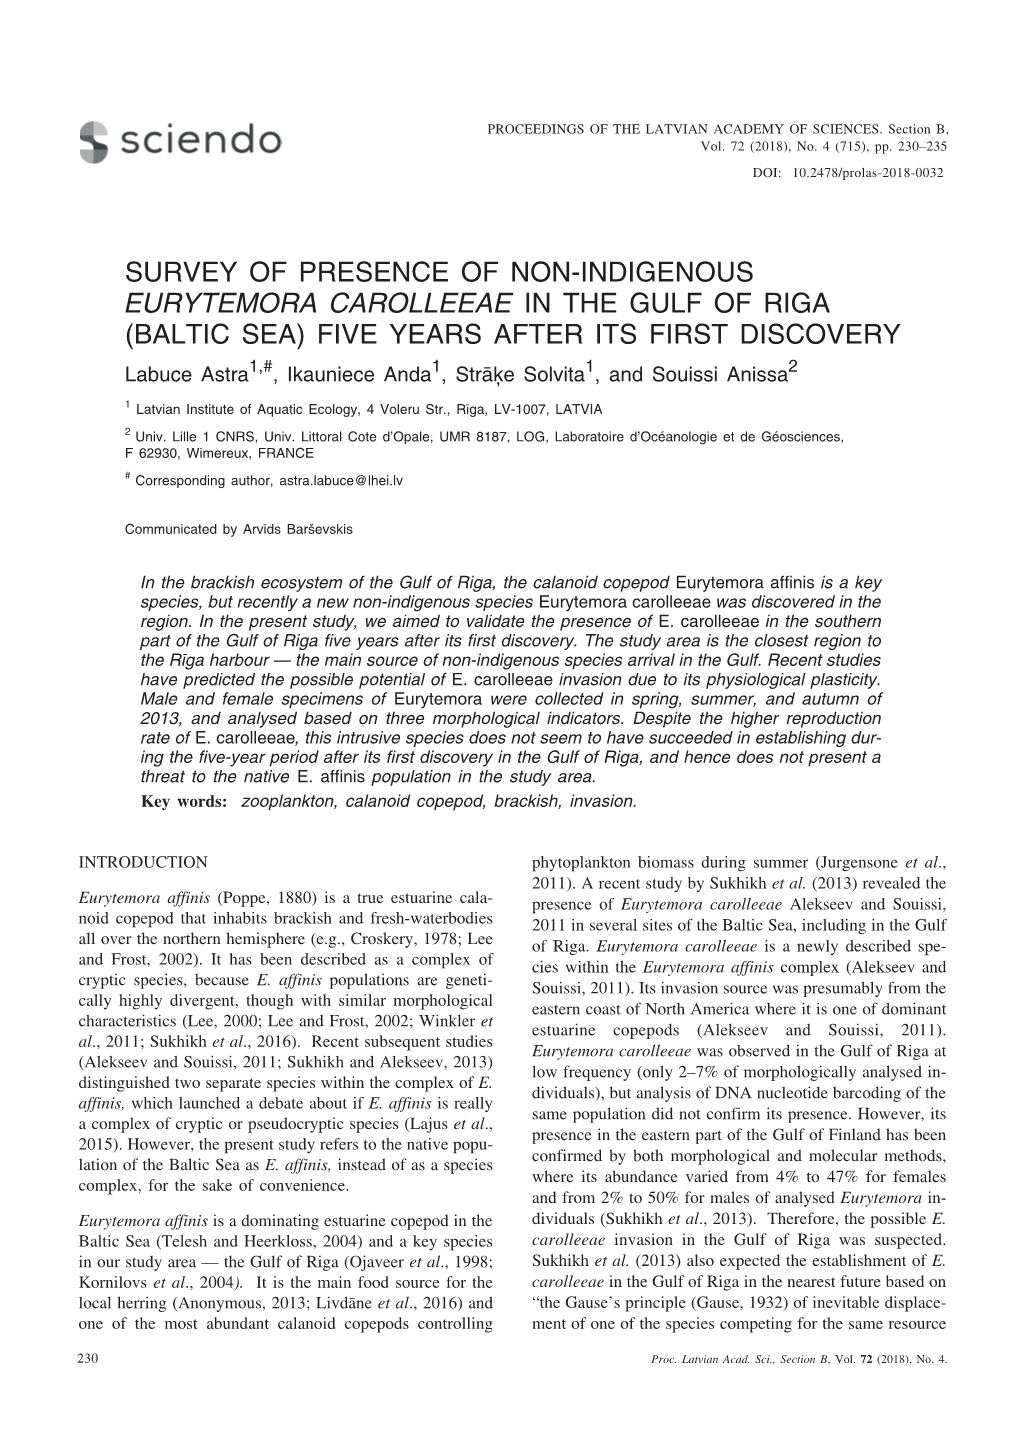 Survey of Presence of Non-Indigenous Eurytemora Carolleeae in the Gulf Of